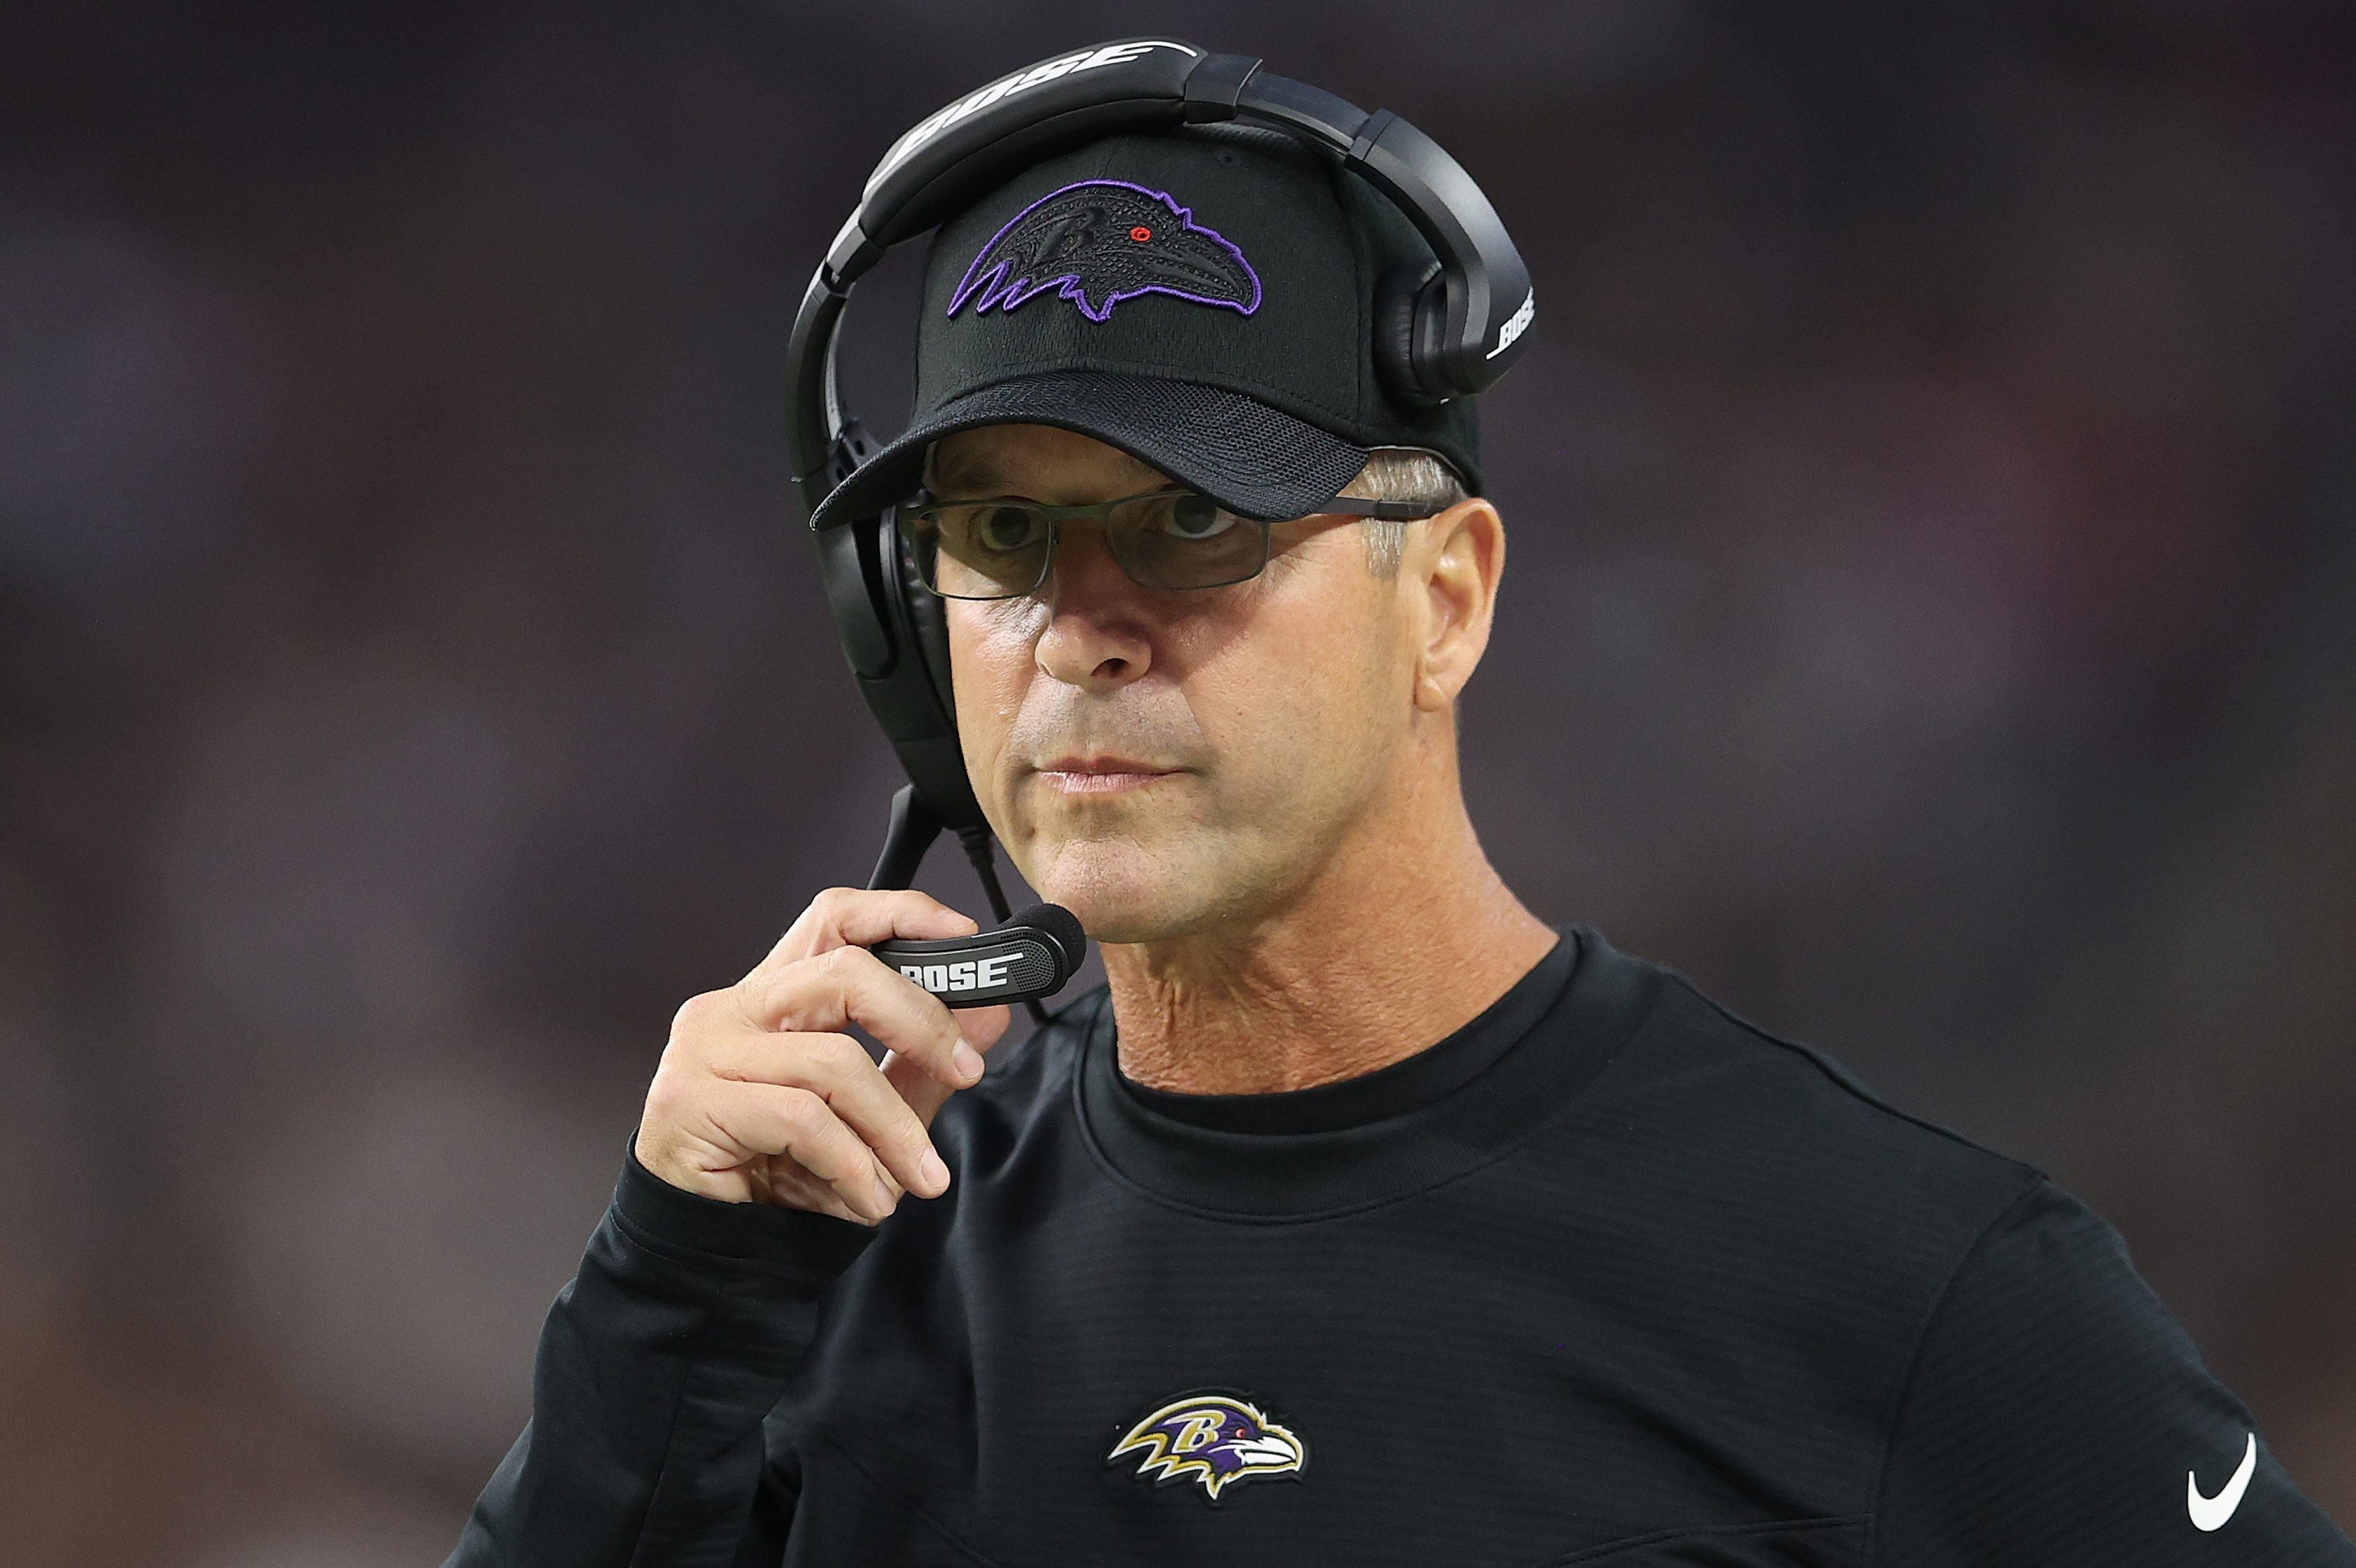 Head coach John Harbaugh of the Baltimore Ravens watches a game. Thanks to Harbaugh's fourth-down call, the Ravens finally beat the Chiefs.